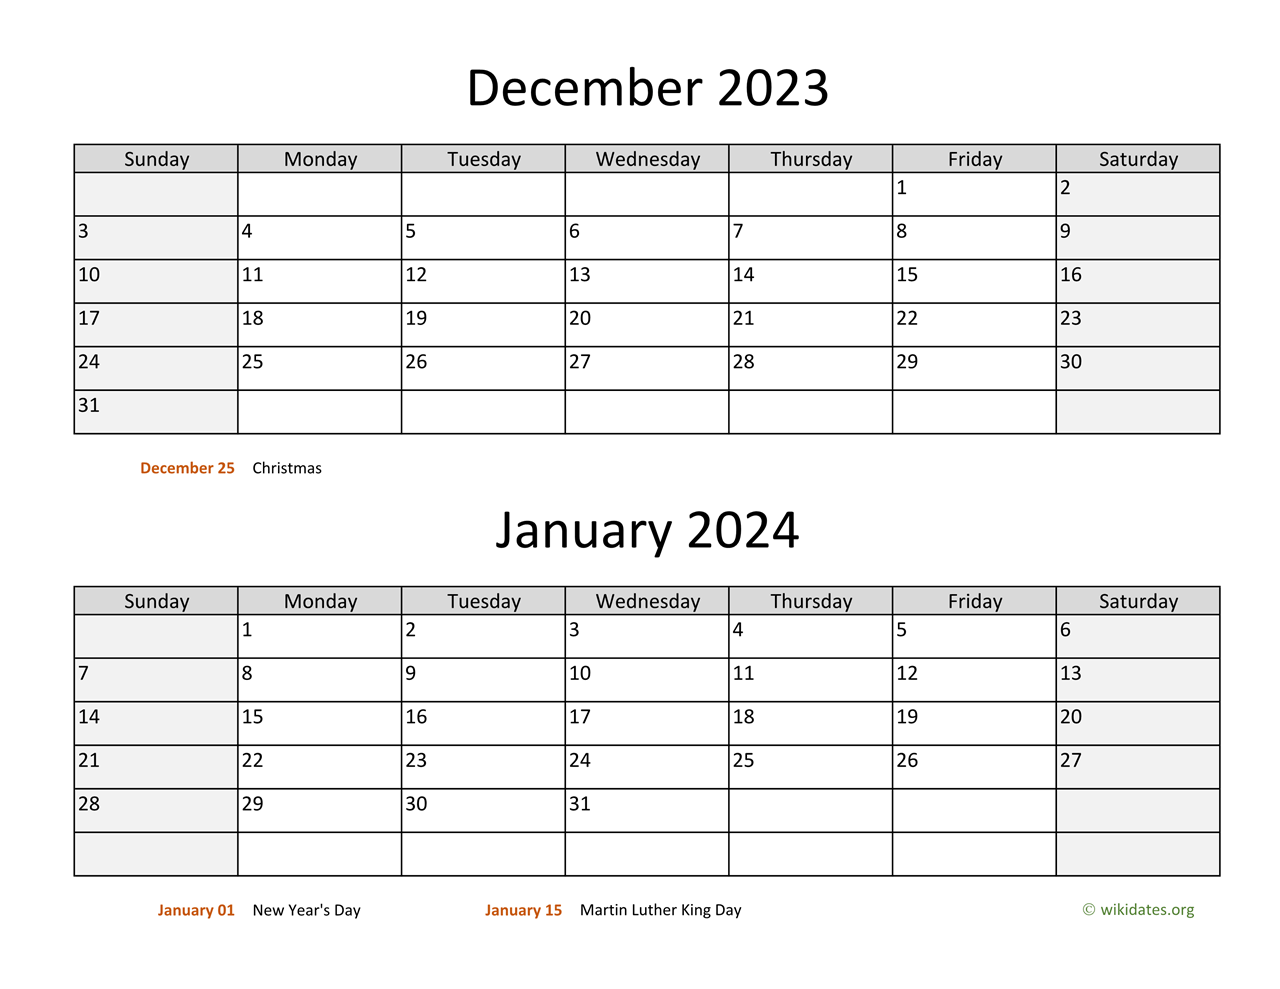 December 2023 And January 2024 Calendar | Wikidates for Printable Calendar December 2023 And January 2024